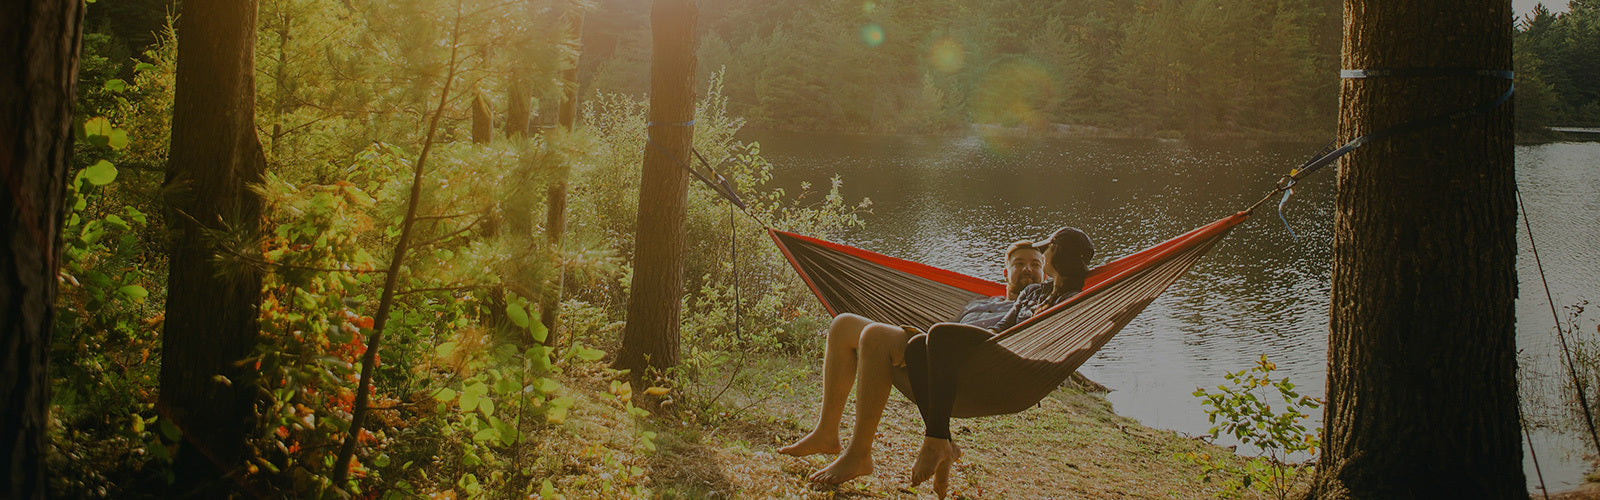 Couple in a hammock on the shore of a small pond in the woods.